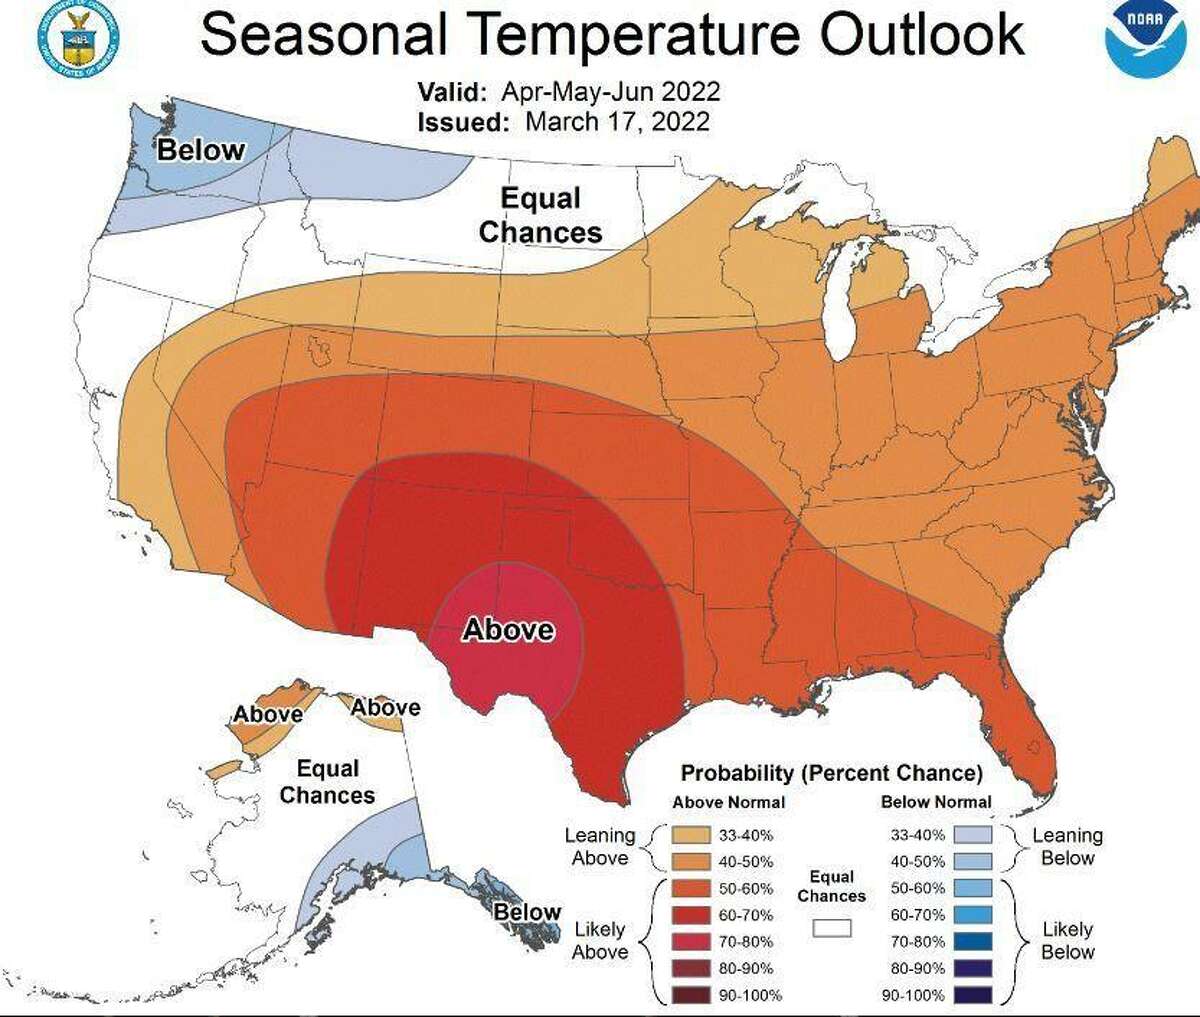 See the Spring weather outlook from the National Weather Service